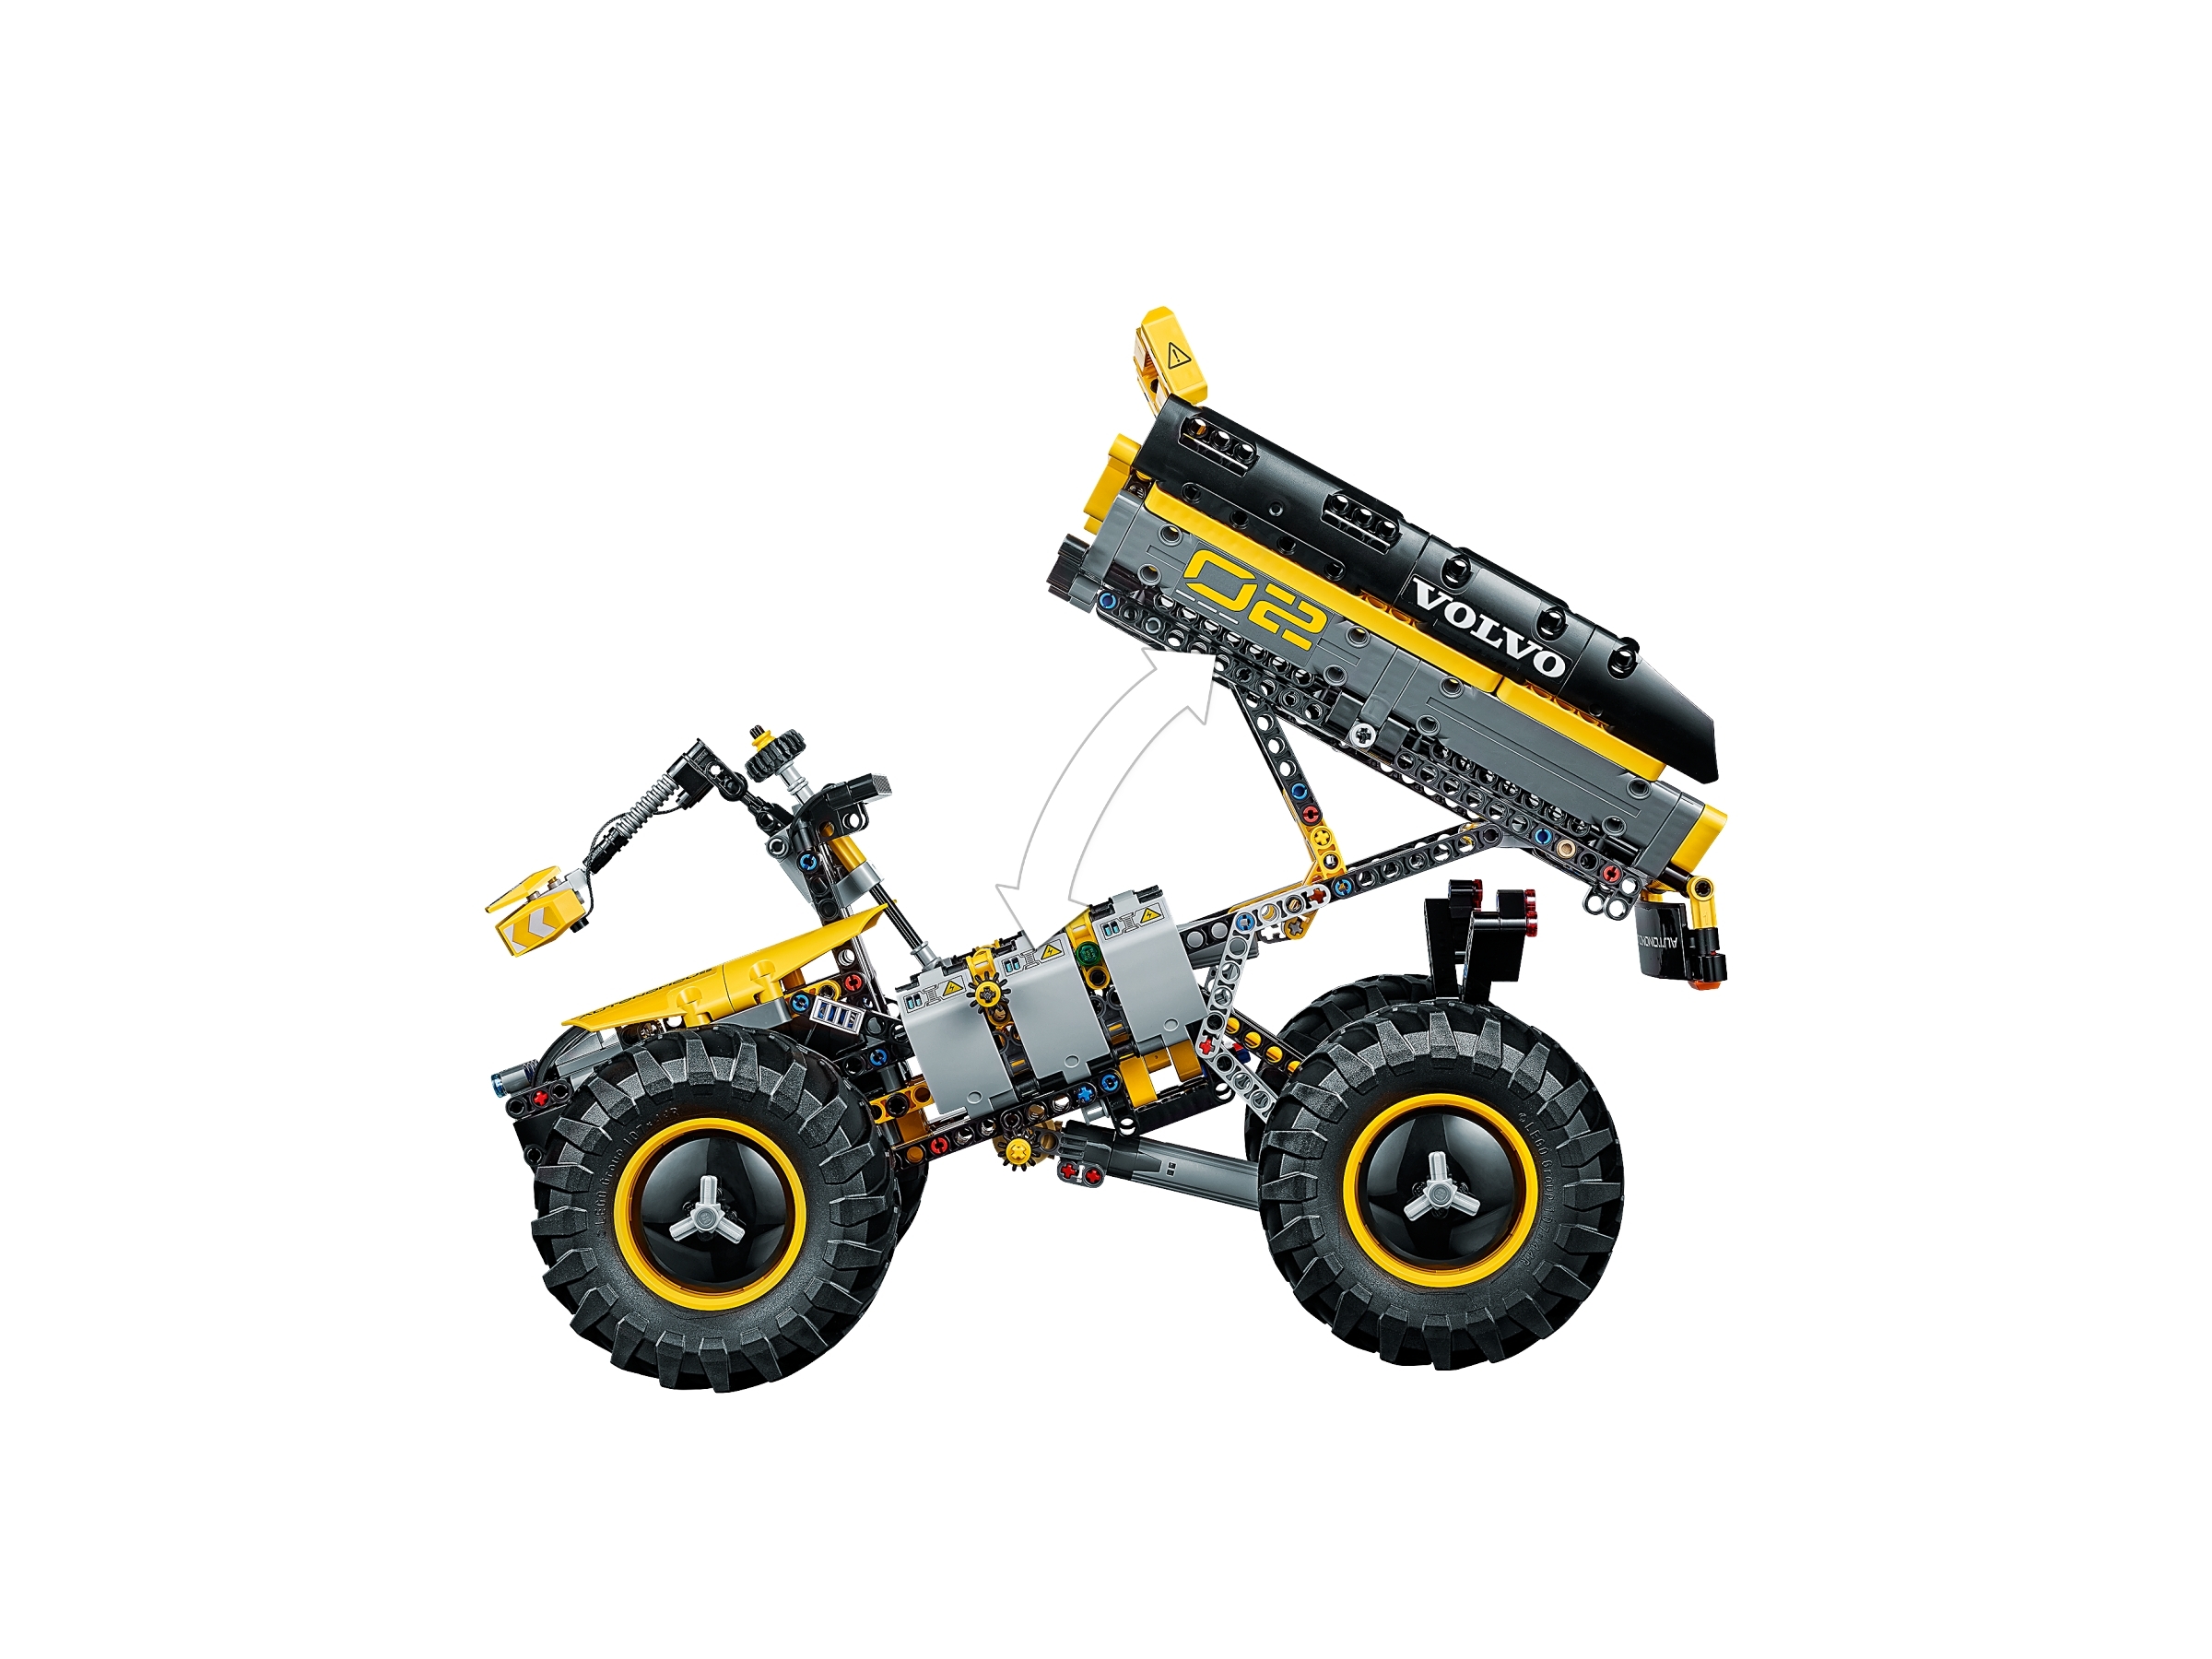 Volvo Concept Wheel Loader ZEUX 42081 | Technic™ | Buy online at the Official Shop US